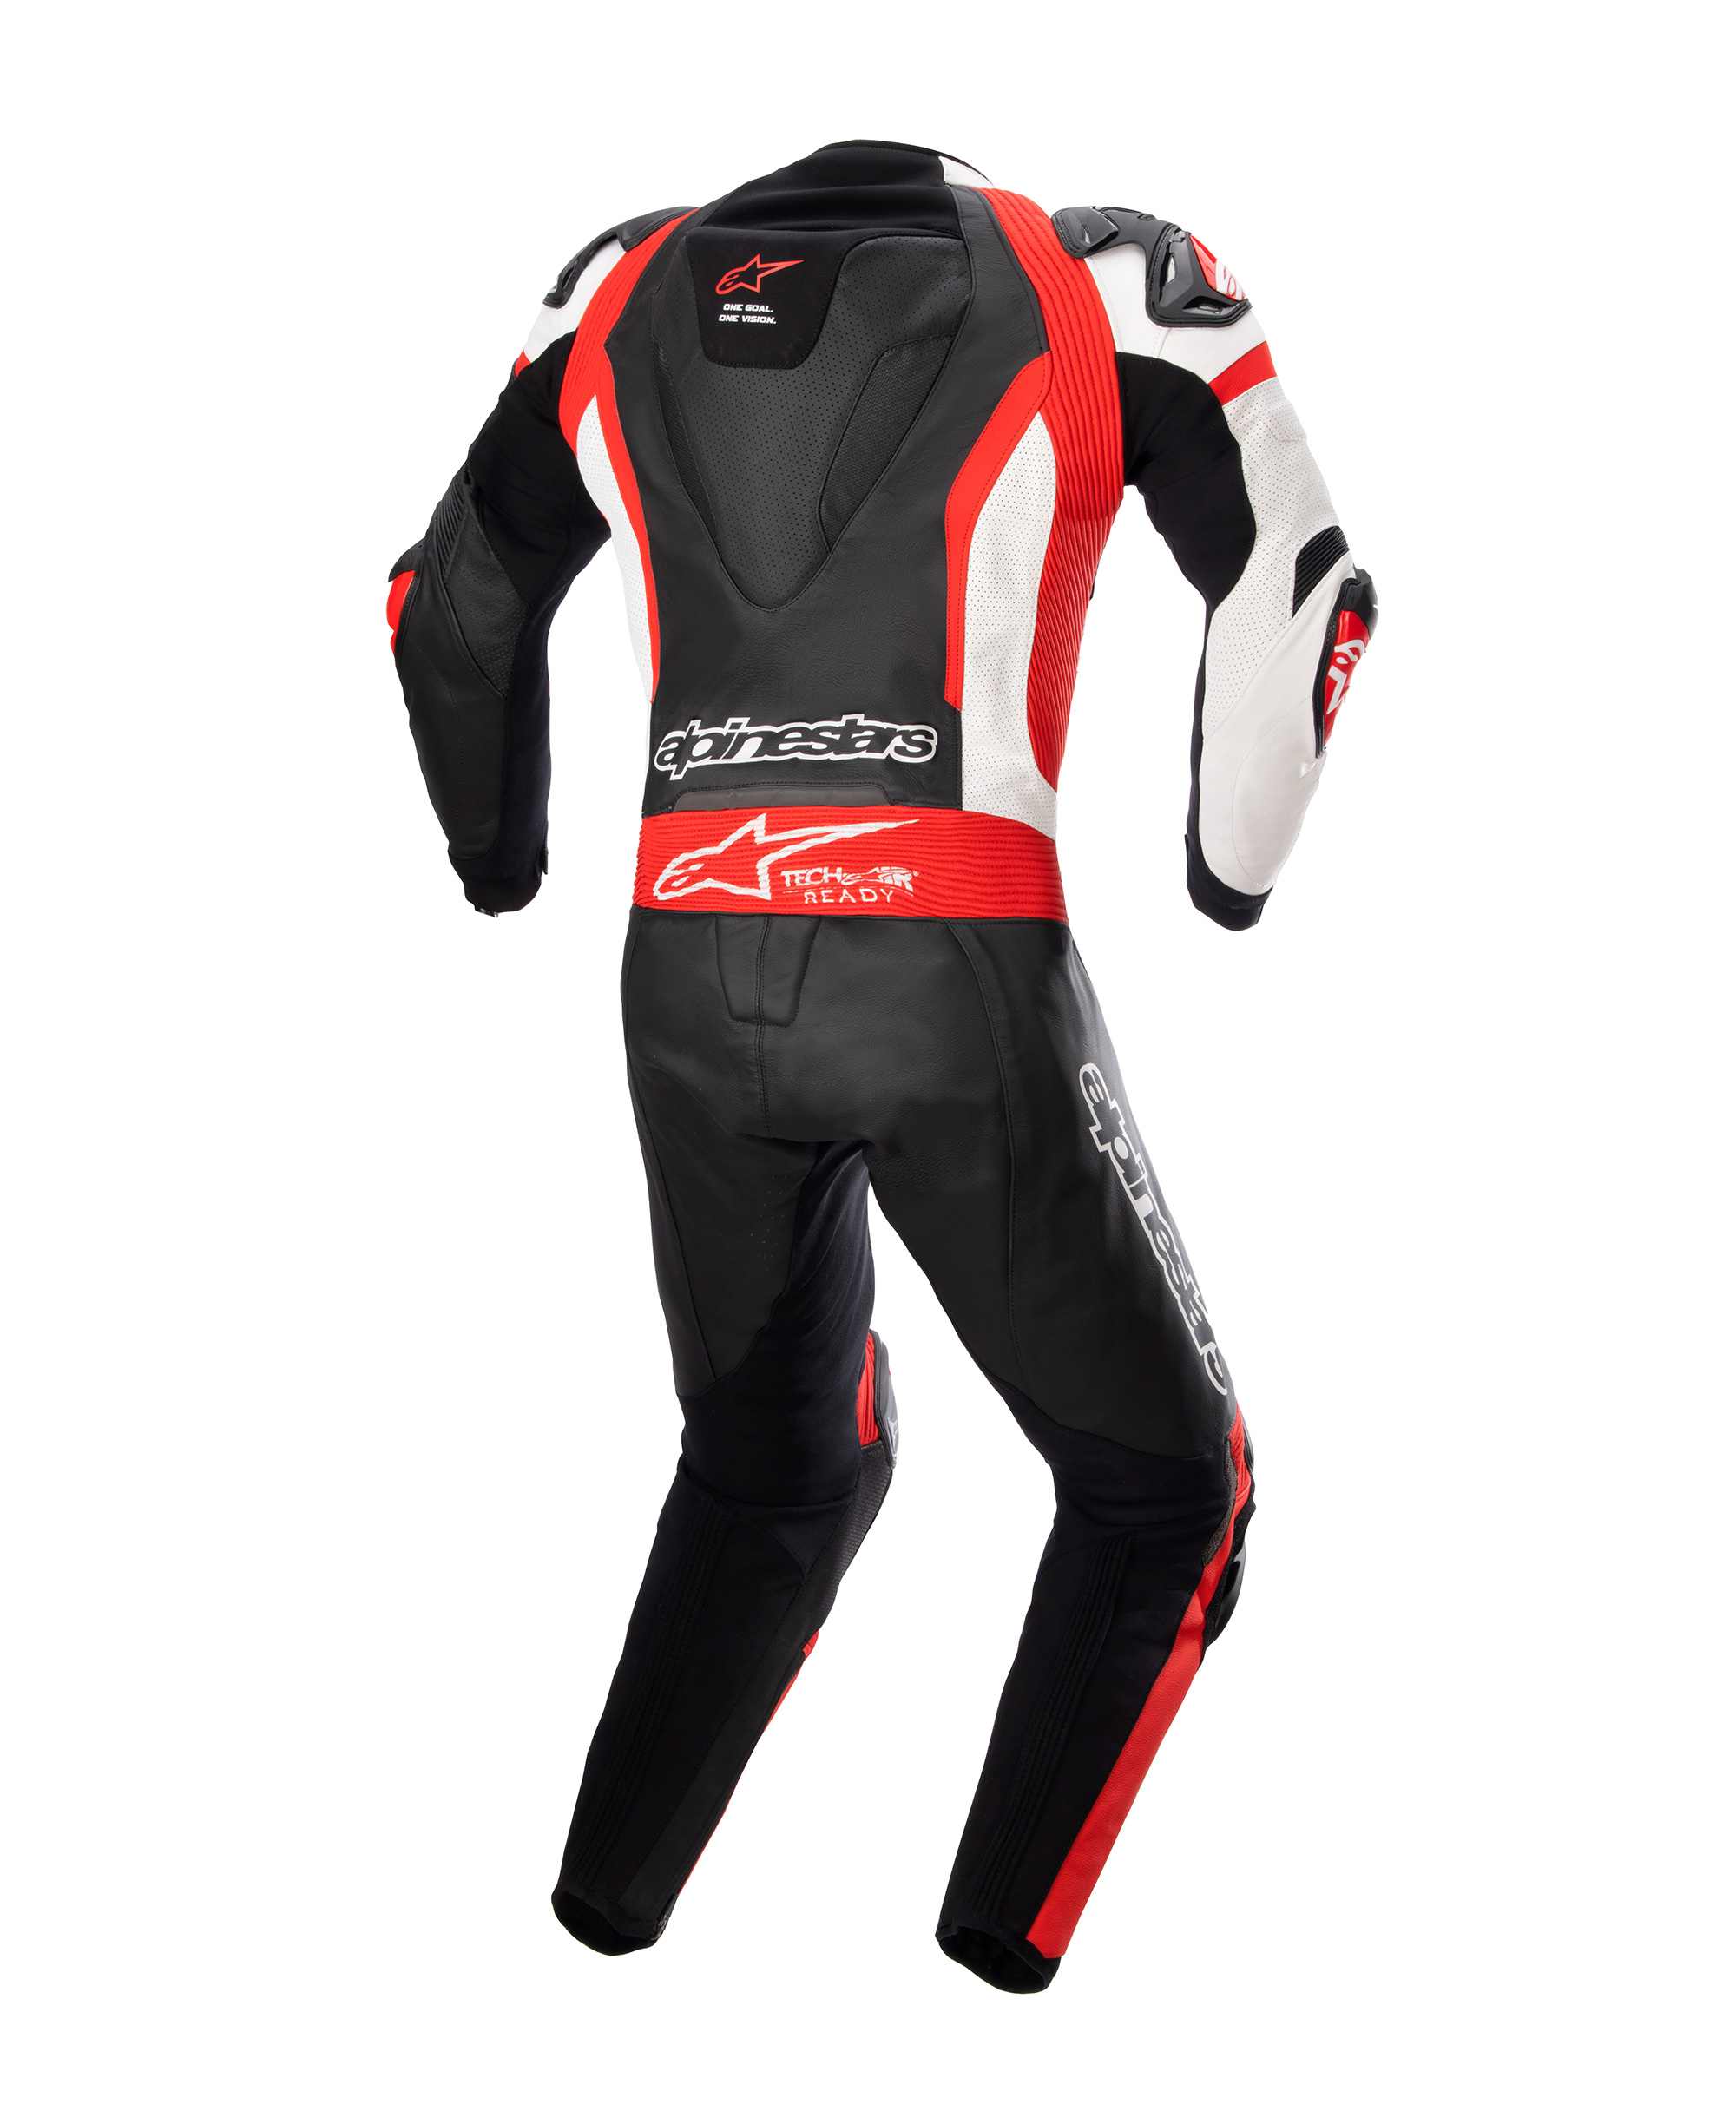 GP IGNITION LEATHER SUIT 1 PC *ASIA BLACK WHITE BRIGHT RED